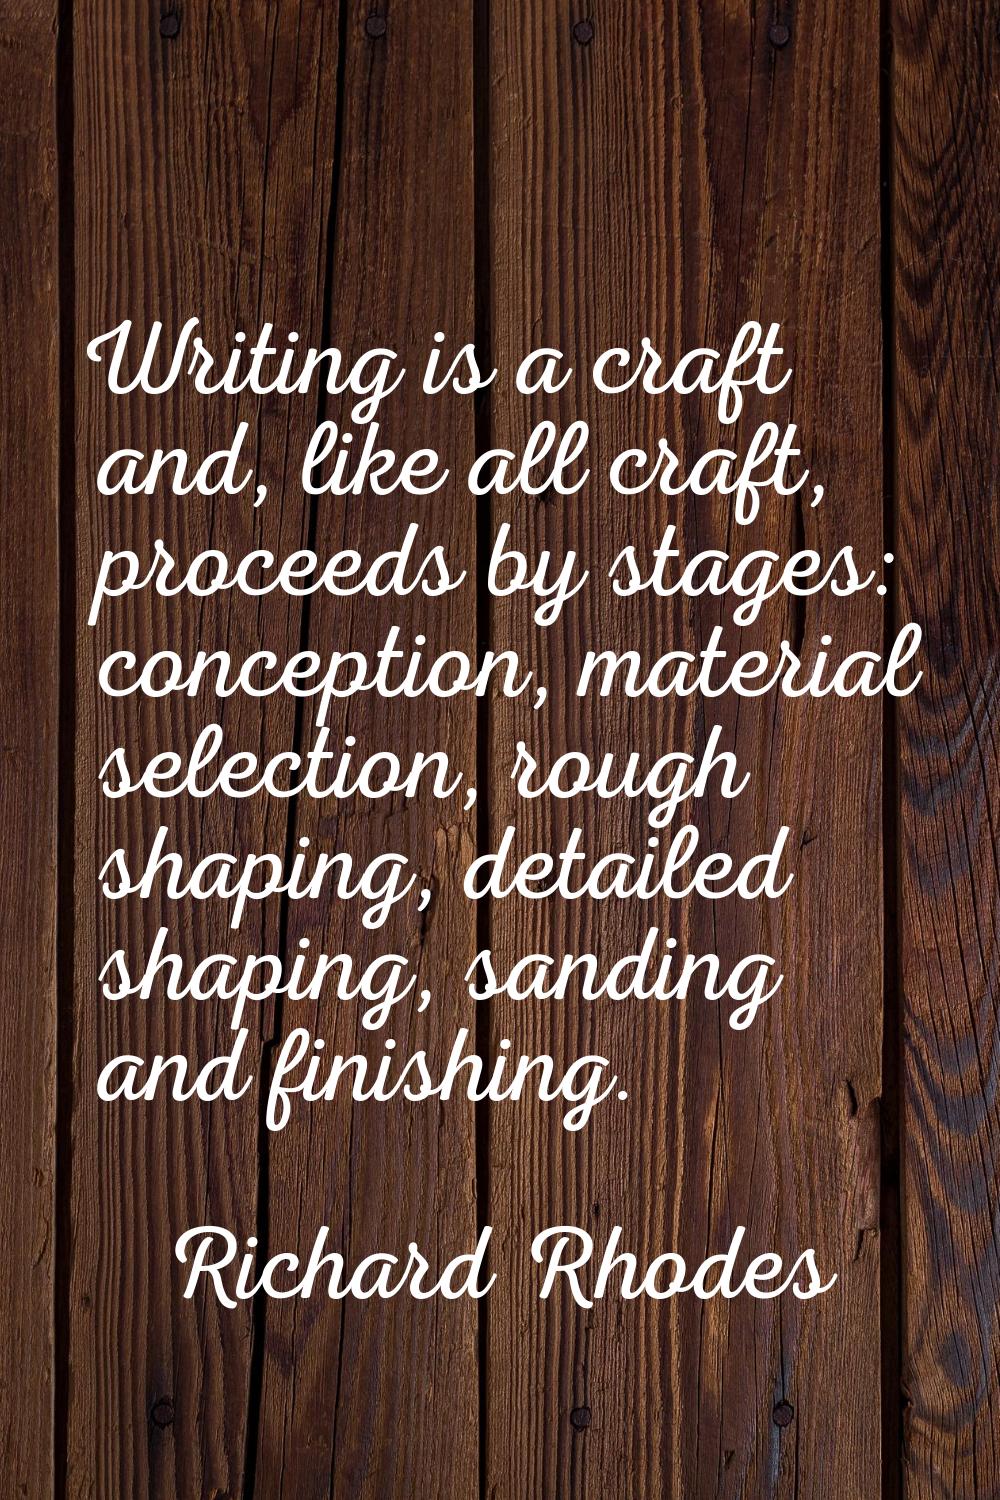 Writing is a craft and, like all craft, proceeds by stages: conception, material selection, rough s